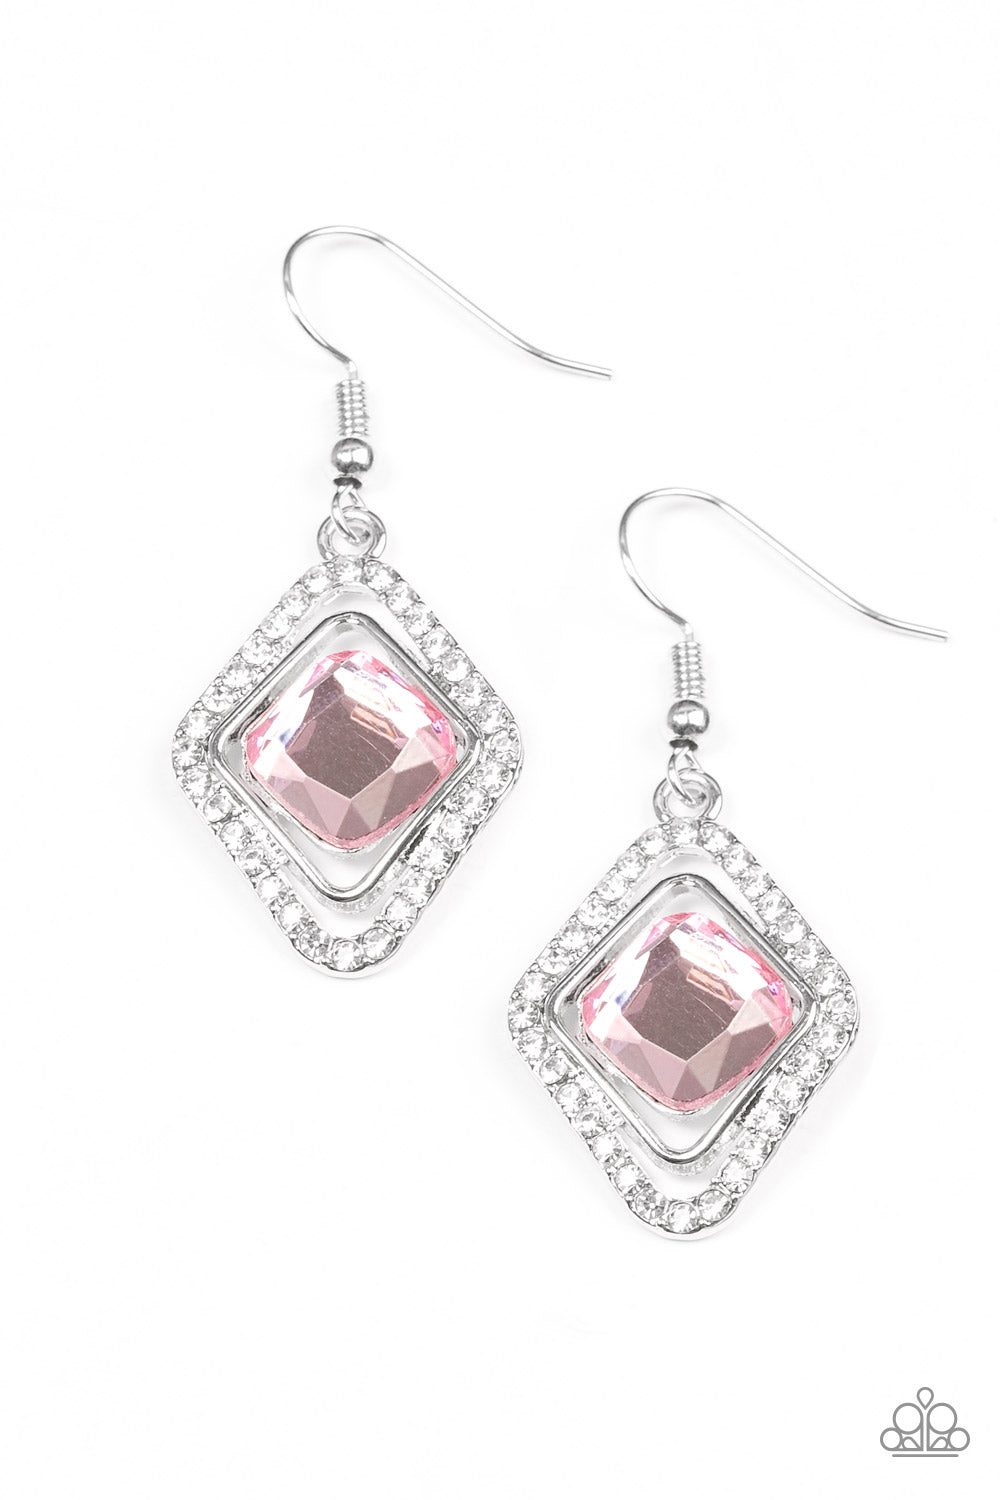 See You In Court - Pink earrings